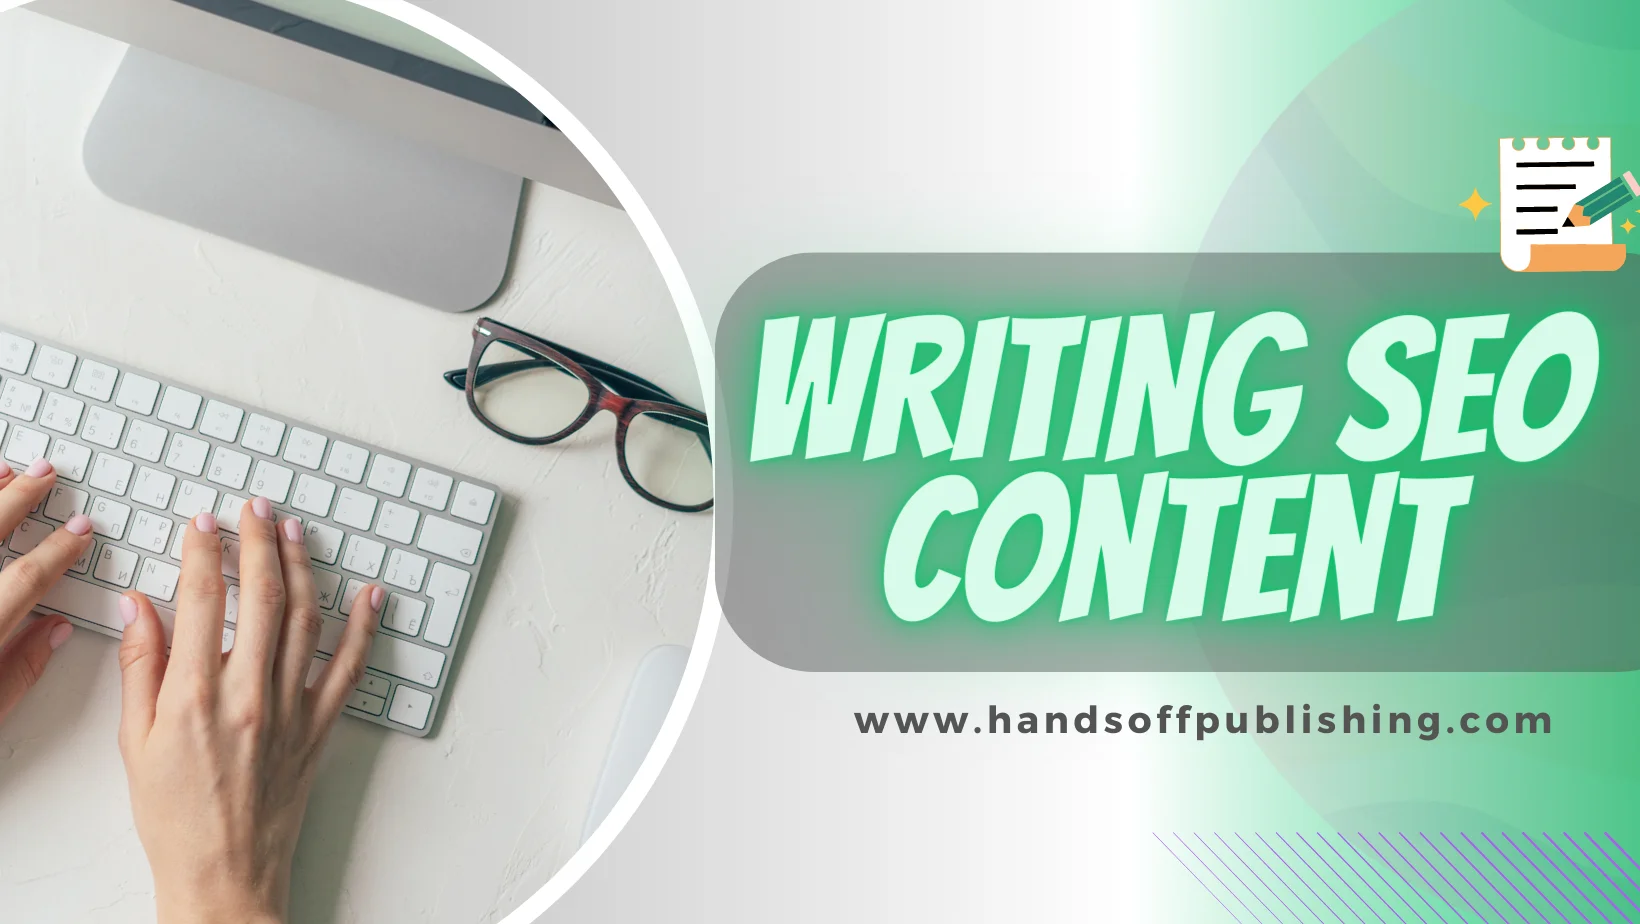 Writing SEO Content: Learn To Write SEO-Friendly Posts With Our Tips!